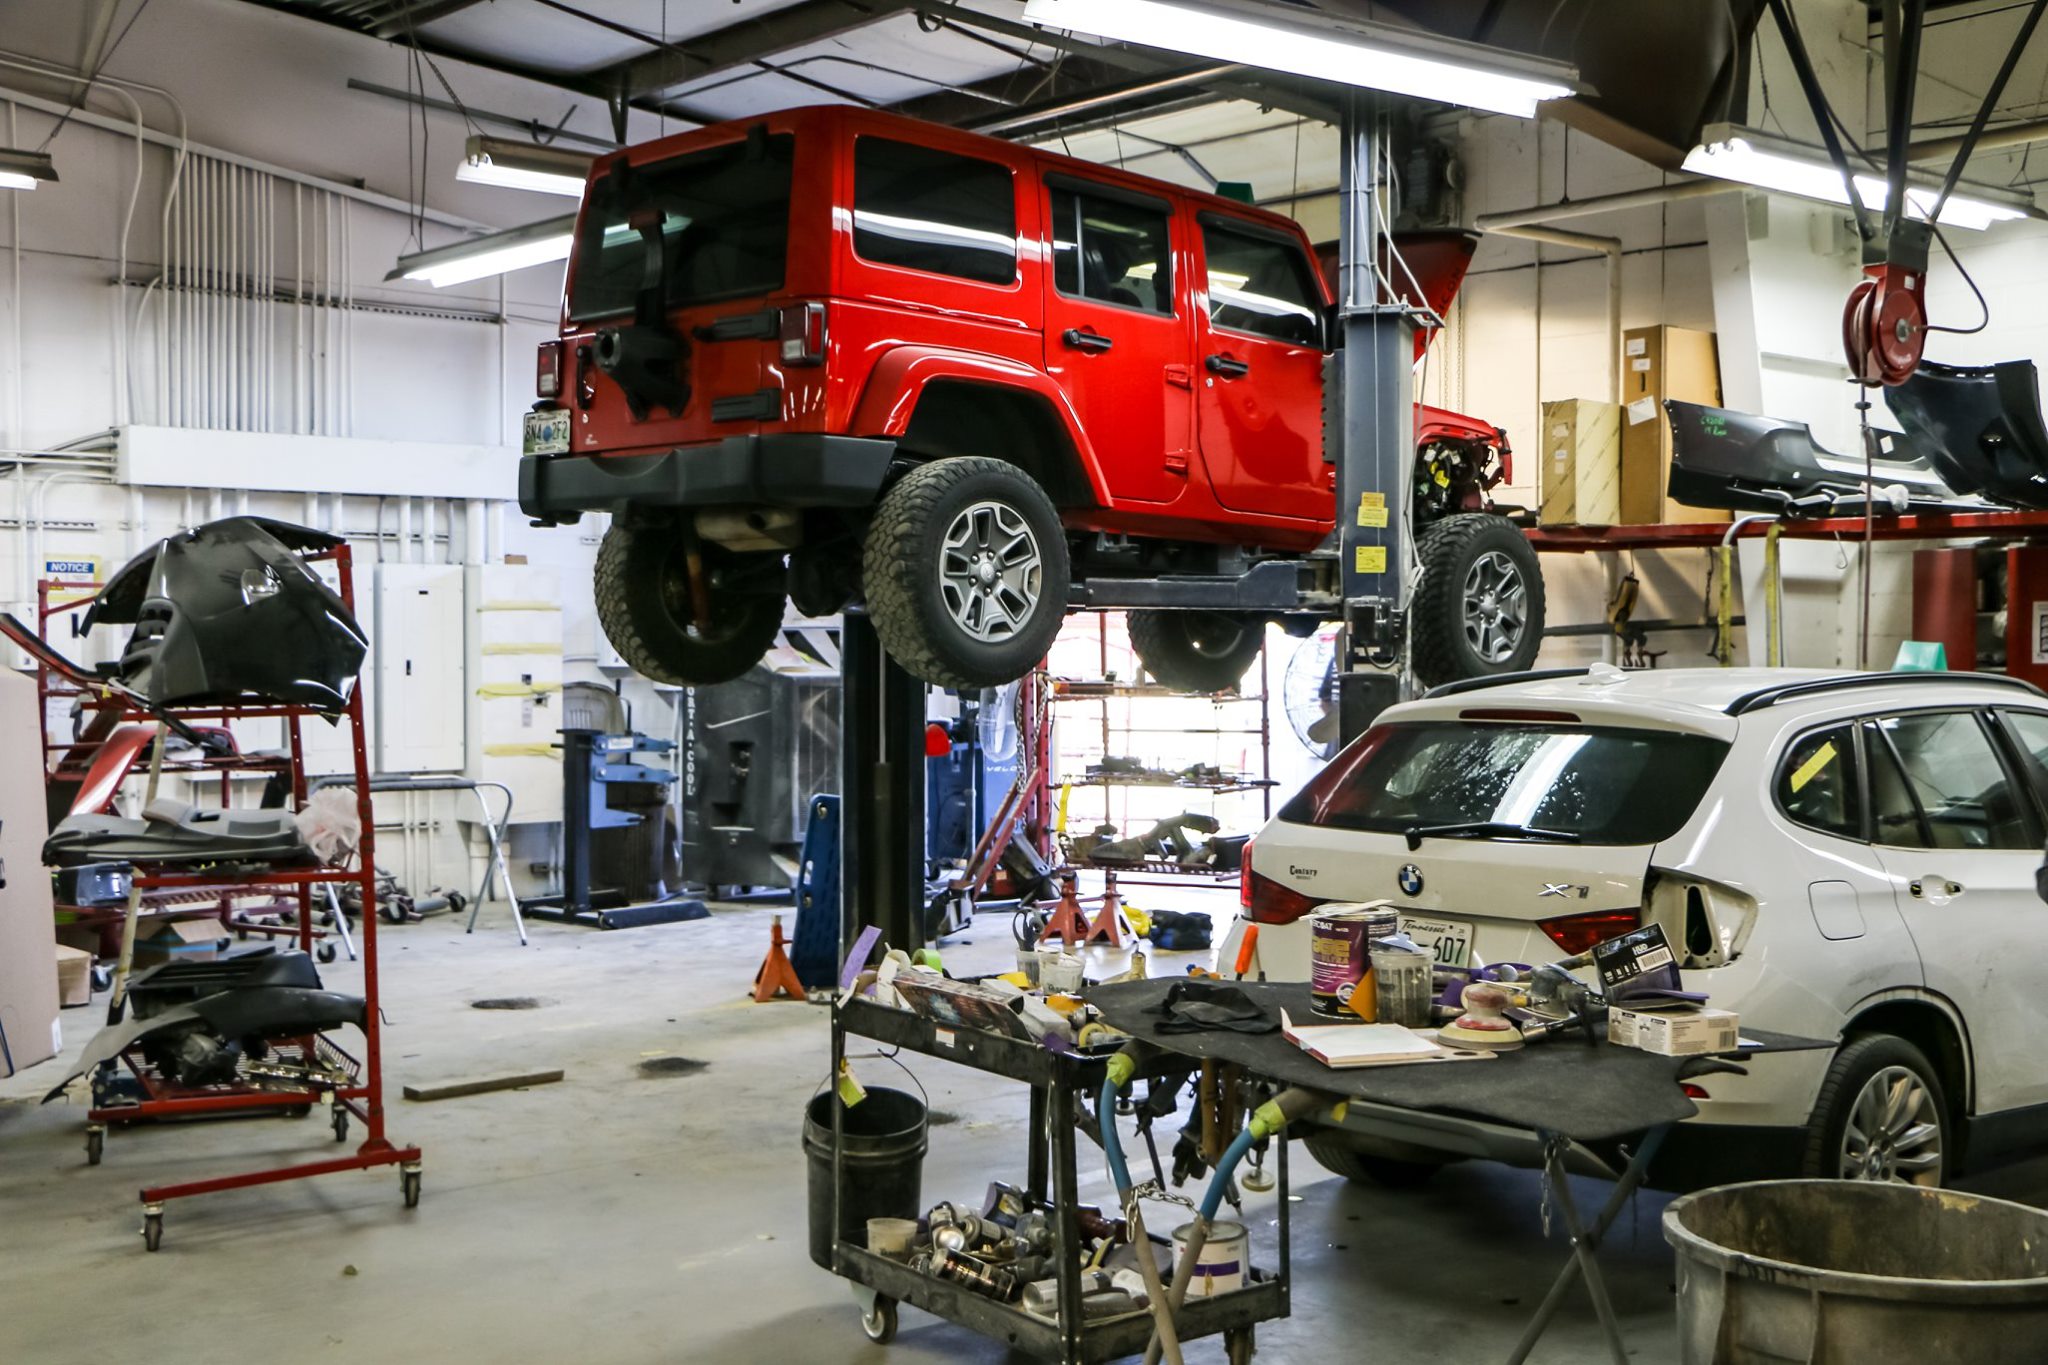 AJeep and BMW being repaired in the body shop of Cool Springs Collision Center